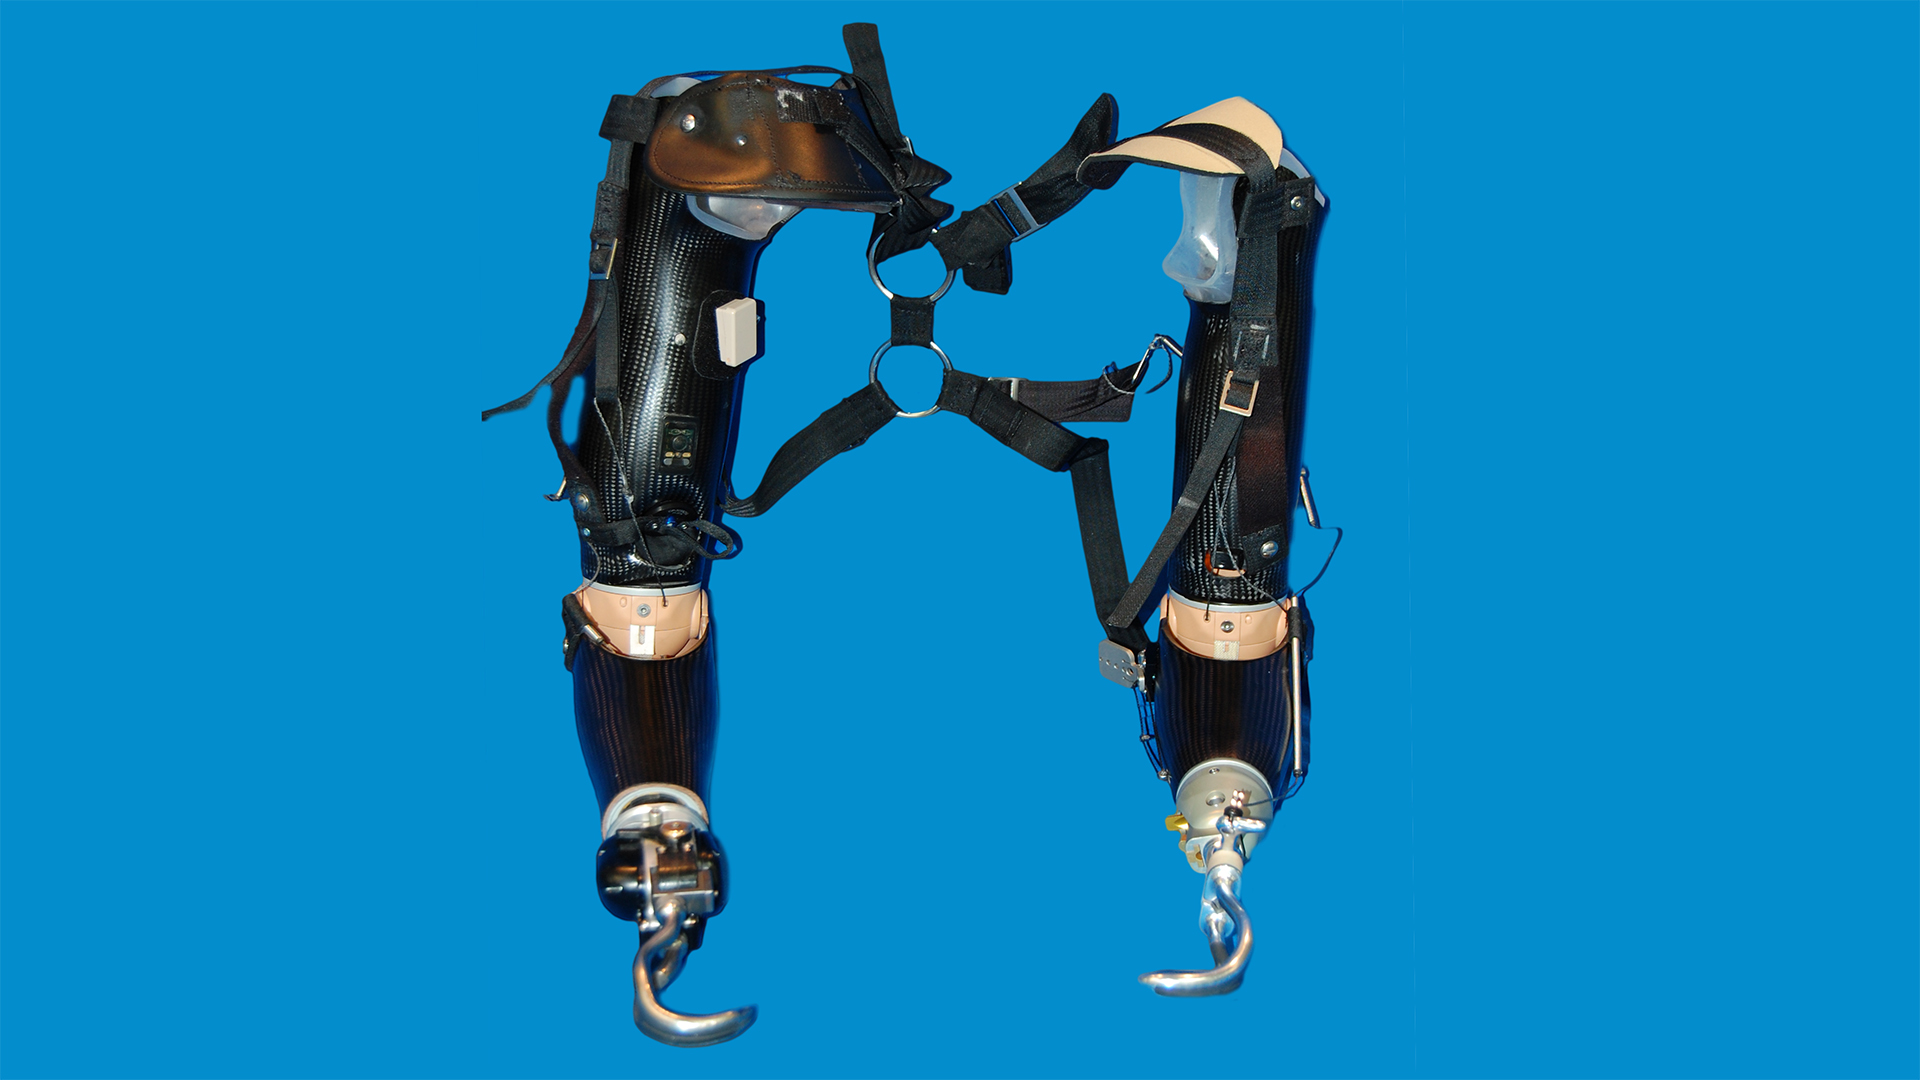 Justin Goodin's Hybrid Prosthesis has an ETD (Electronic Terminal Device) on the left side, and a body-powered hook on the right side.